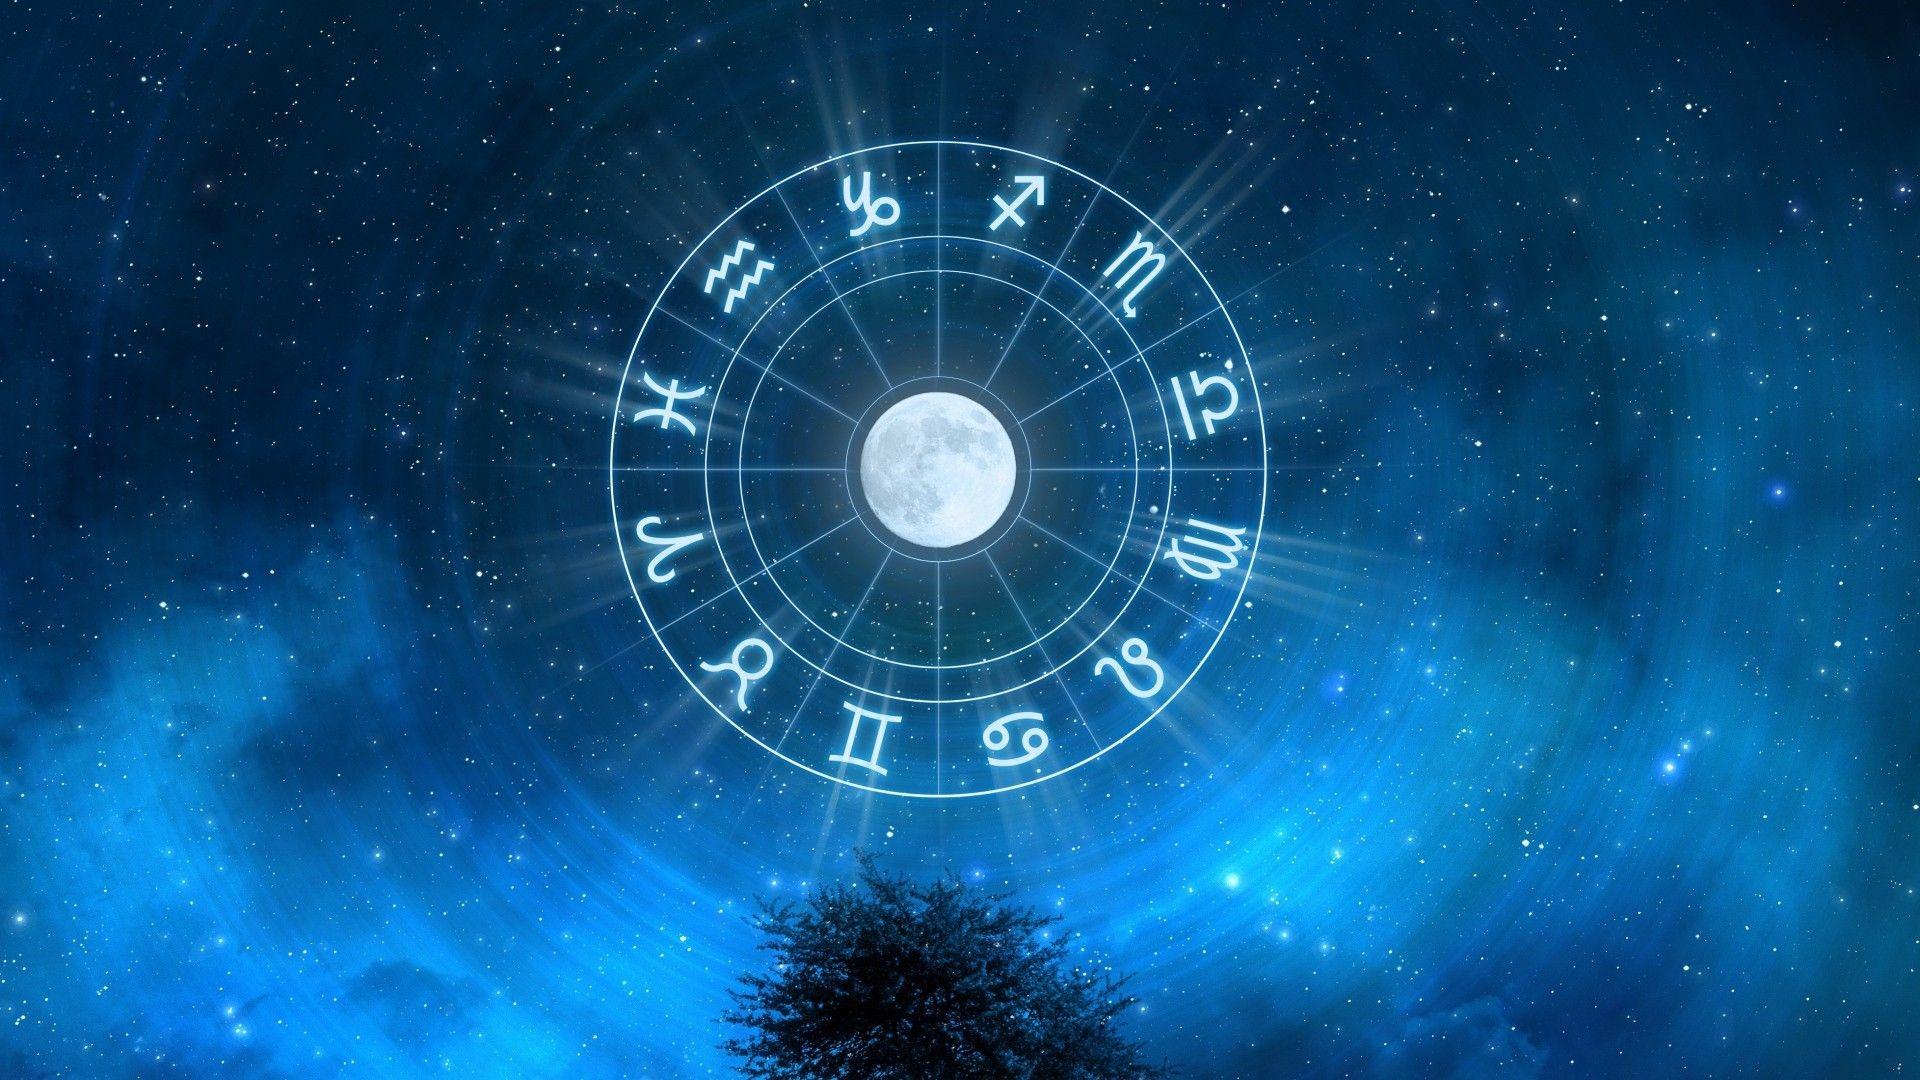 Horoscope. Android wallpaper for free